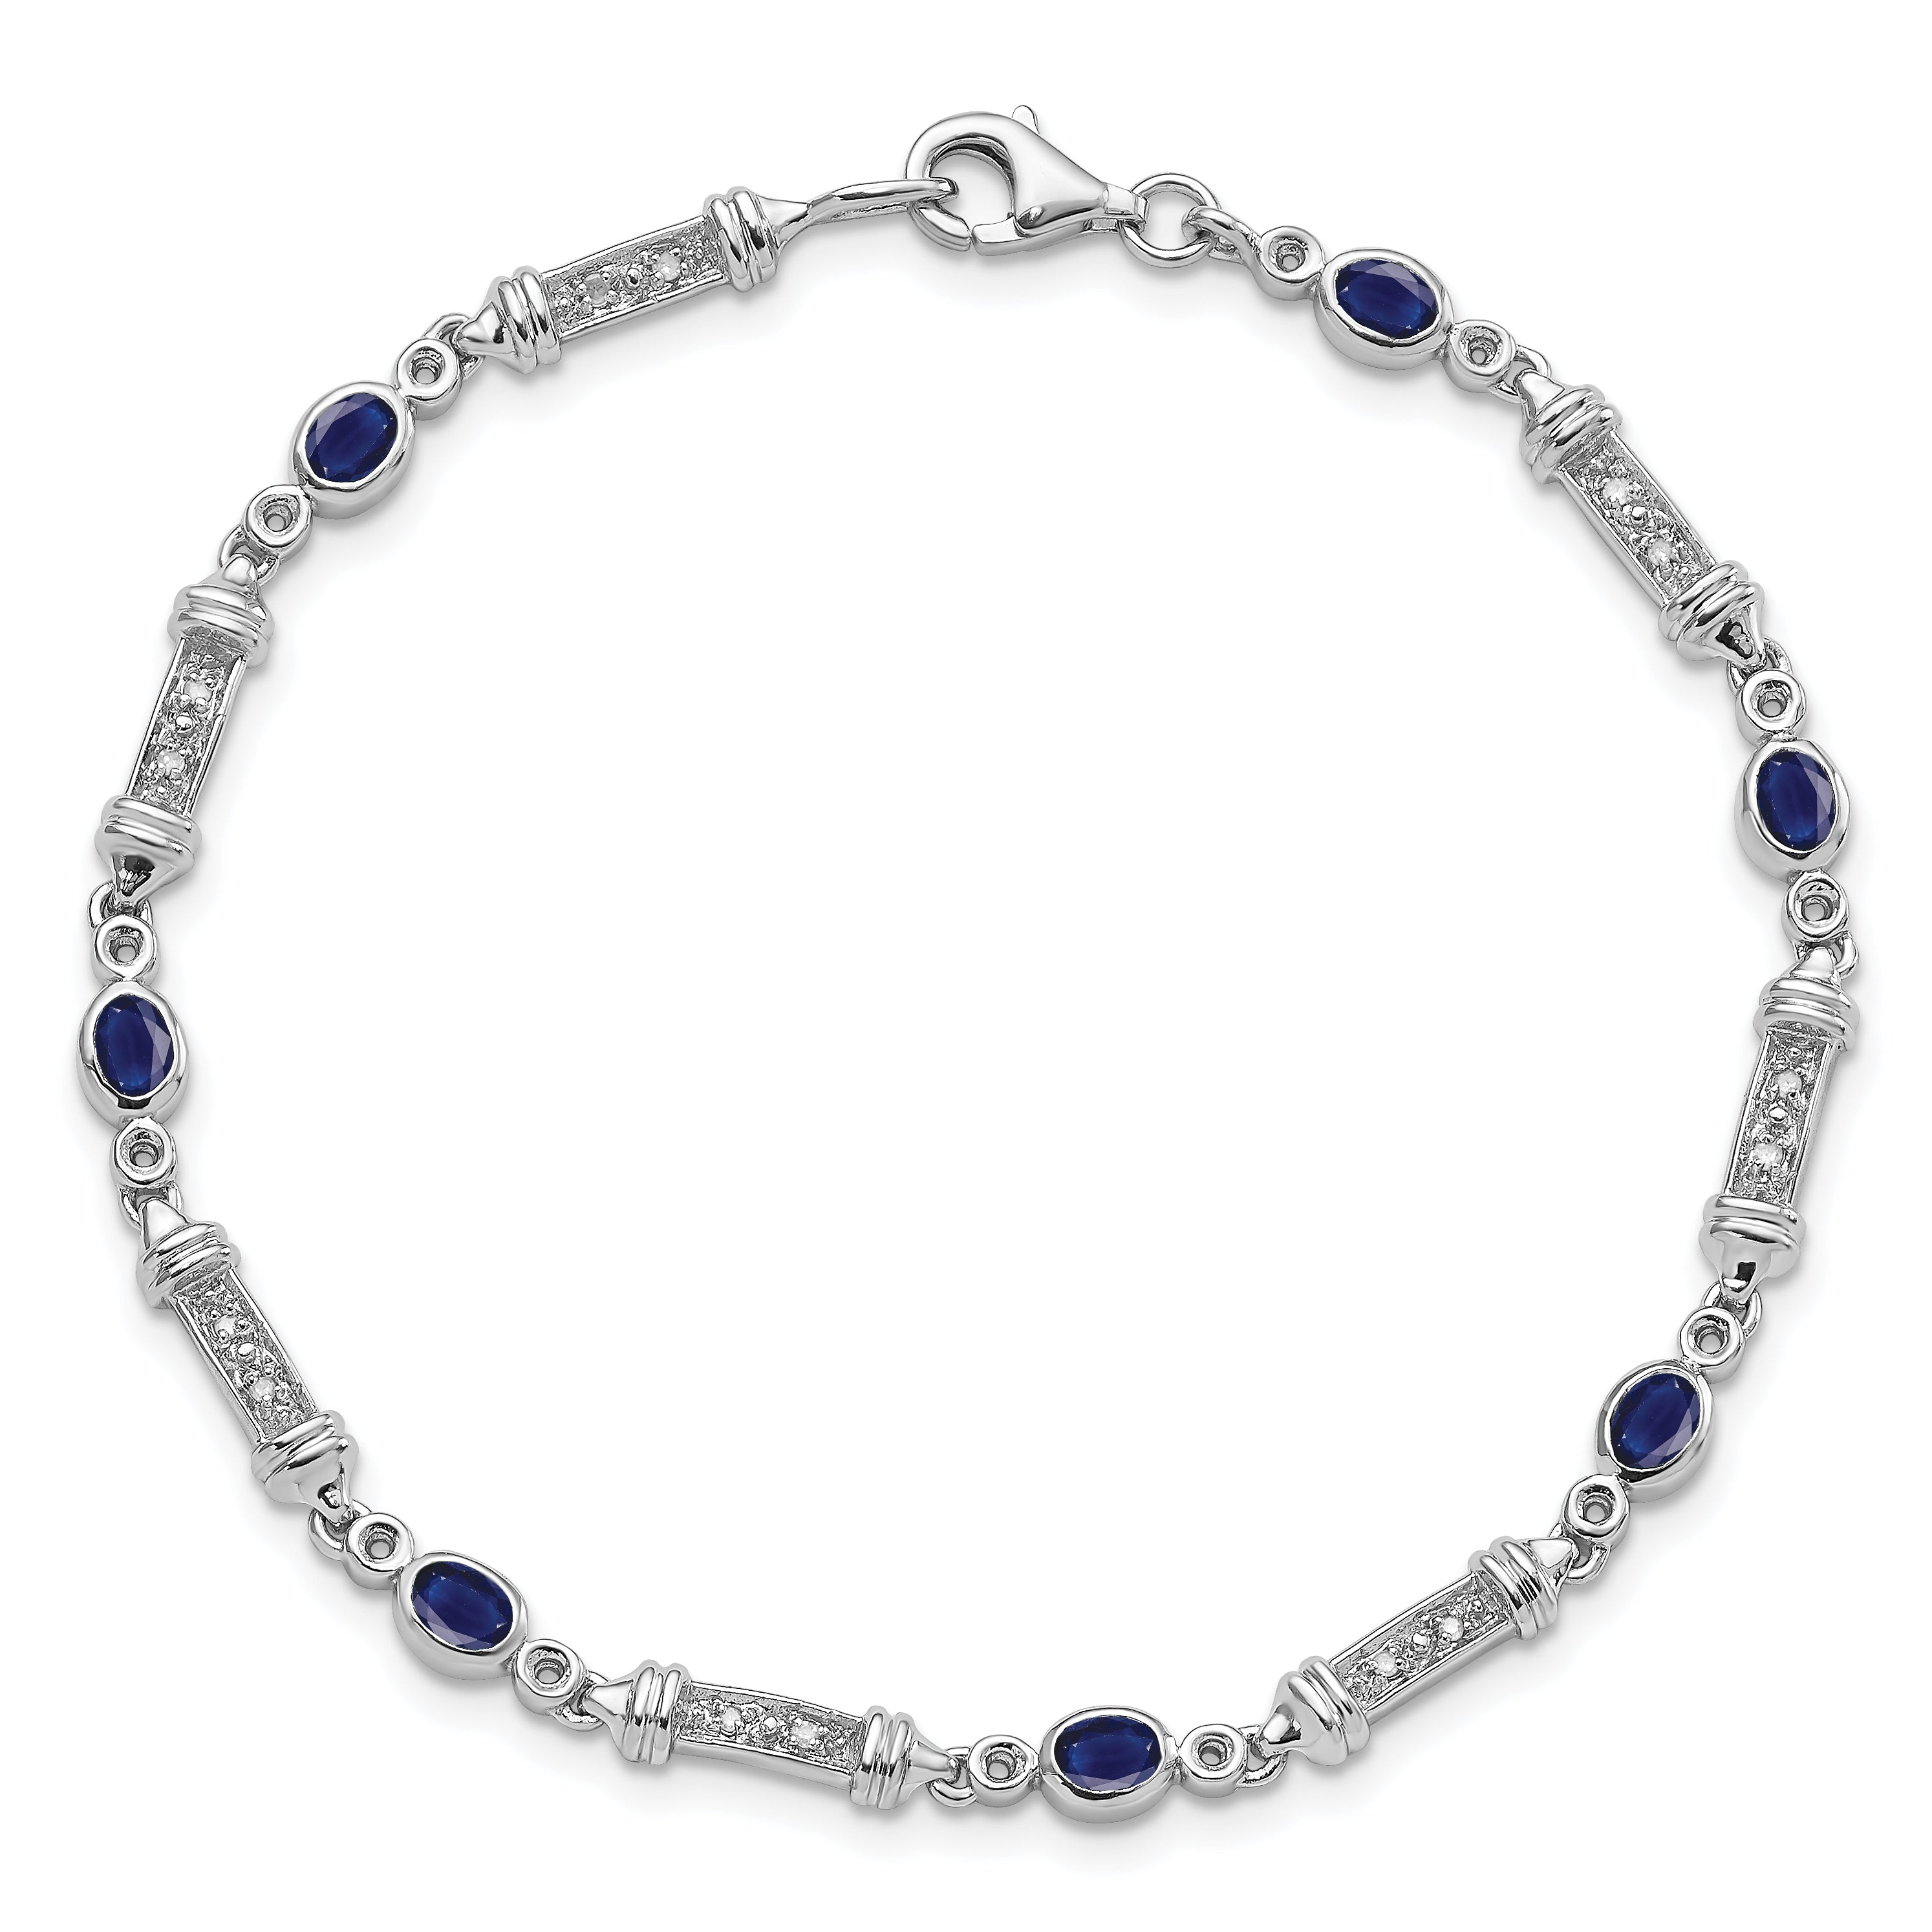 Sterling Silver Rhodium-plated Sapphire and Diamond Bracelet